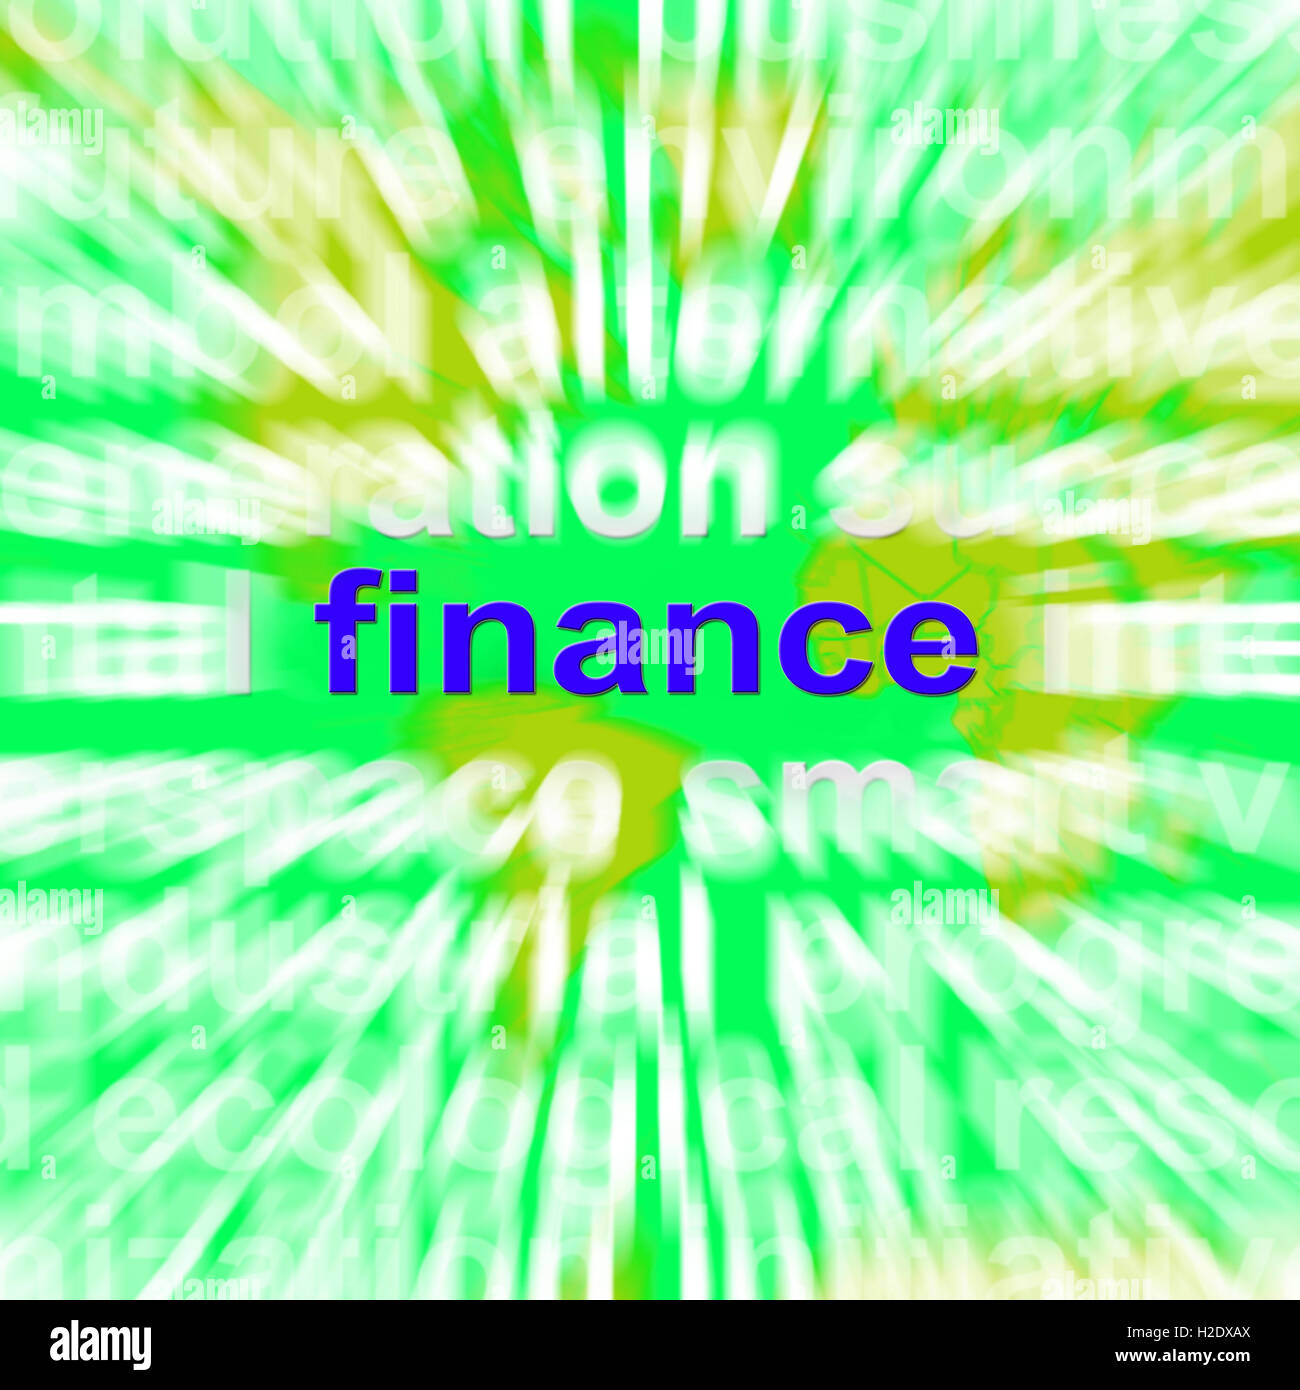 Finance Word Cloud Means Money Investment Stock Photo